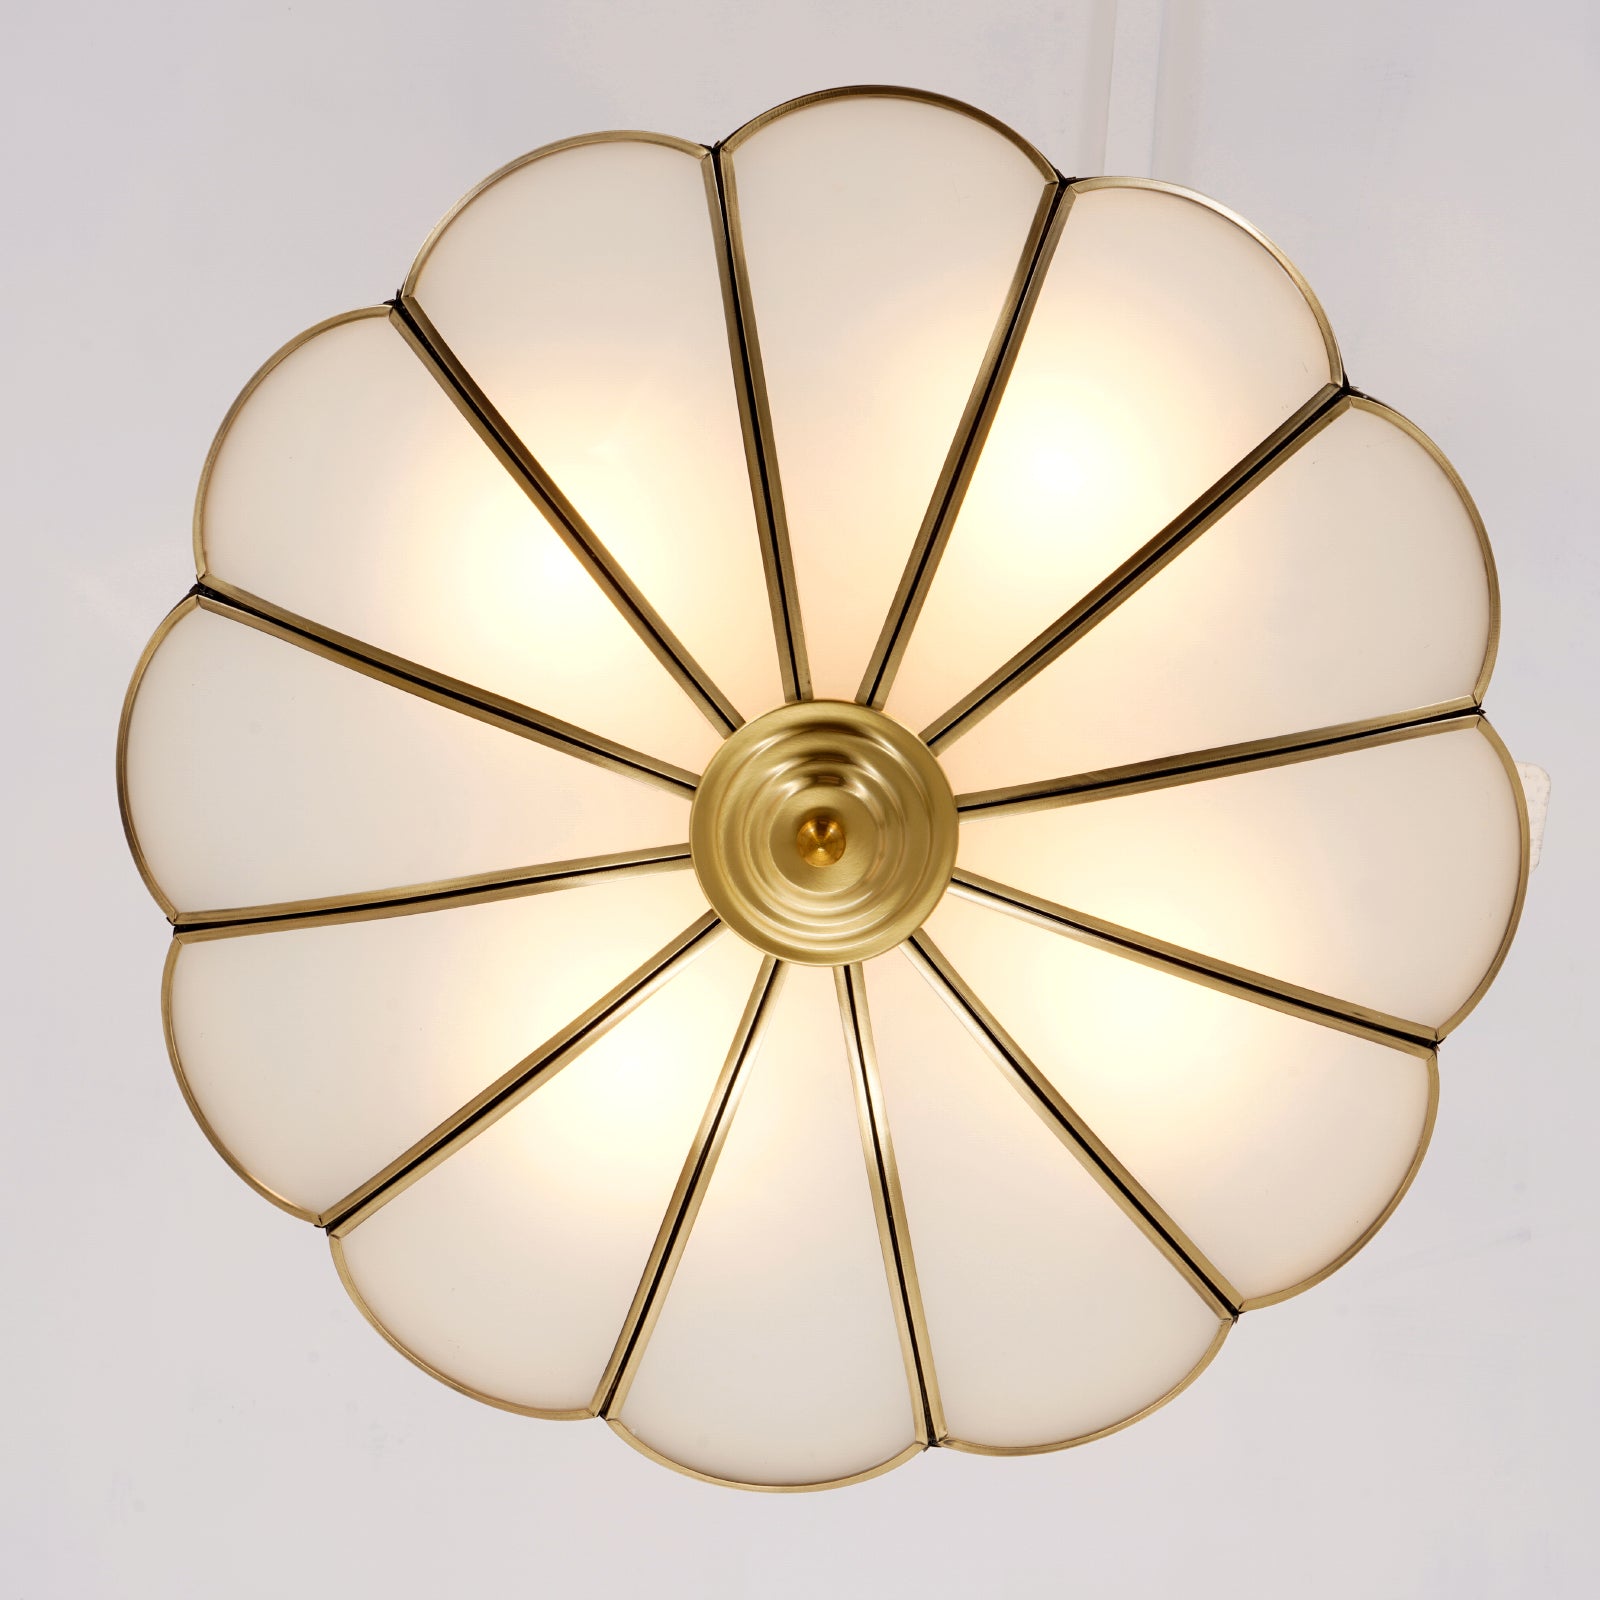 Tiffany Ceiling Light Fixture DS-DR36